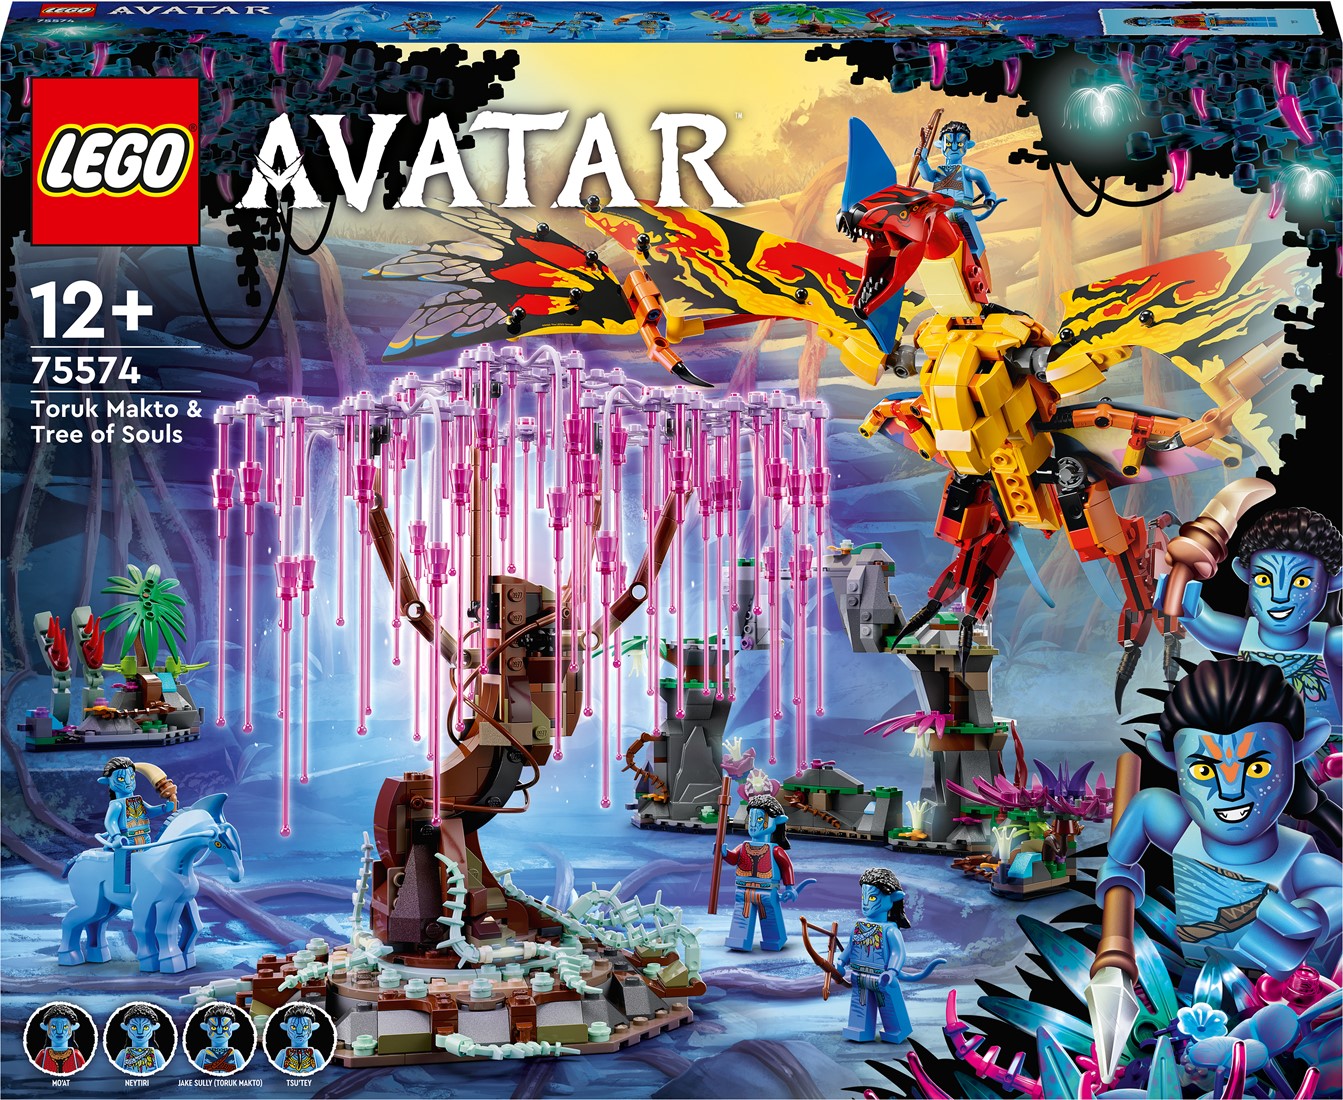 LEGO Avatar sets fall to Amazon alltime lows from 36